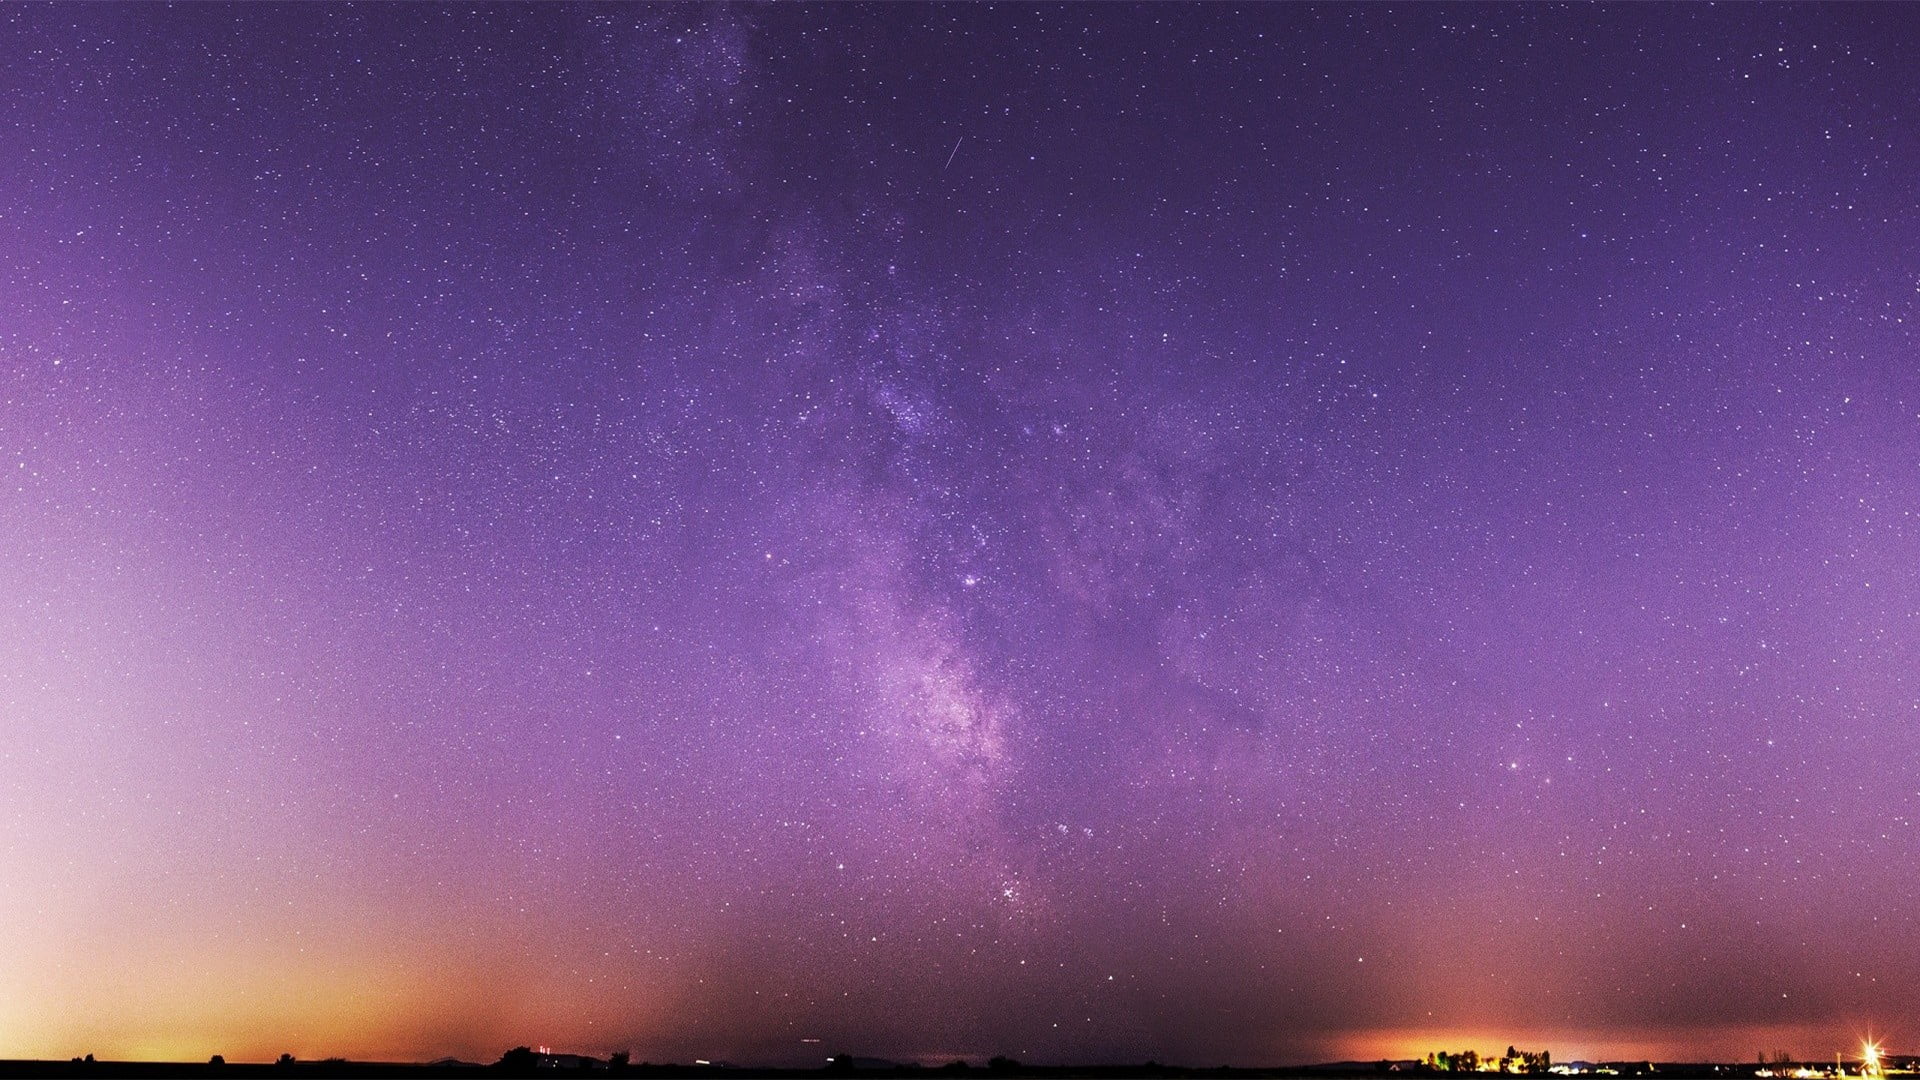 force explosion photography of Milky Way at nighttime, sky